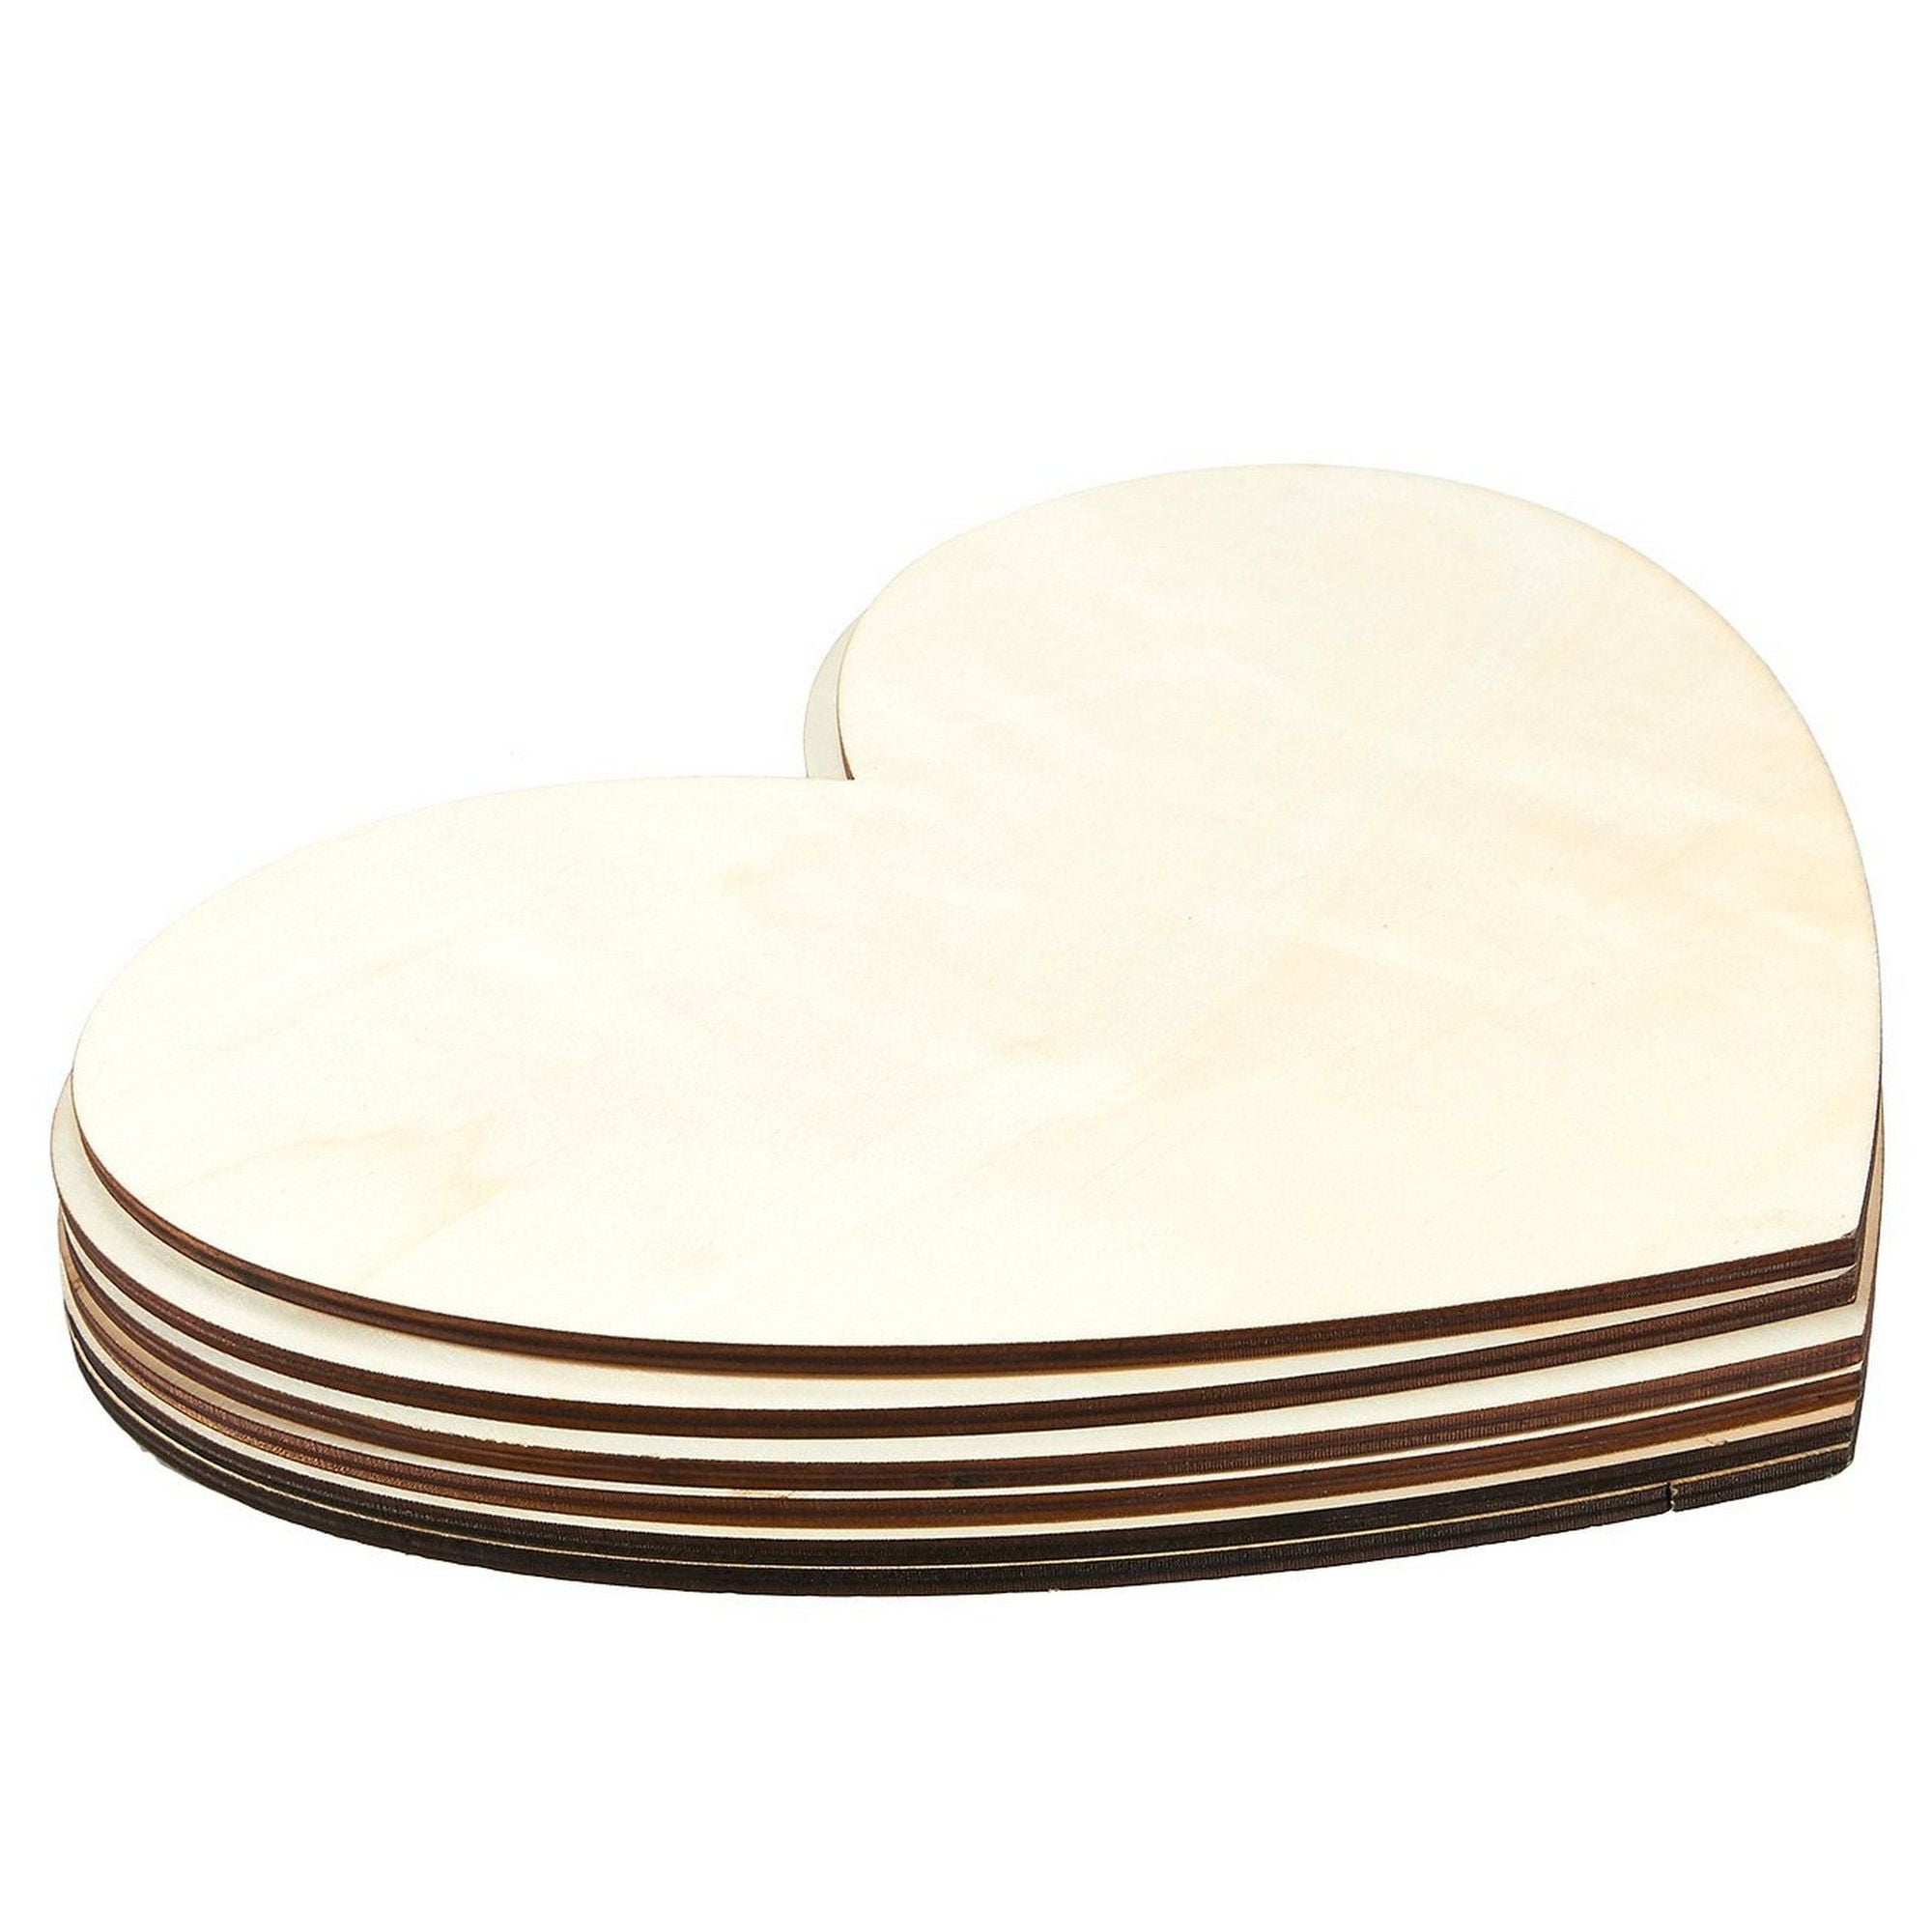 heart shaped wood pieces